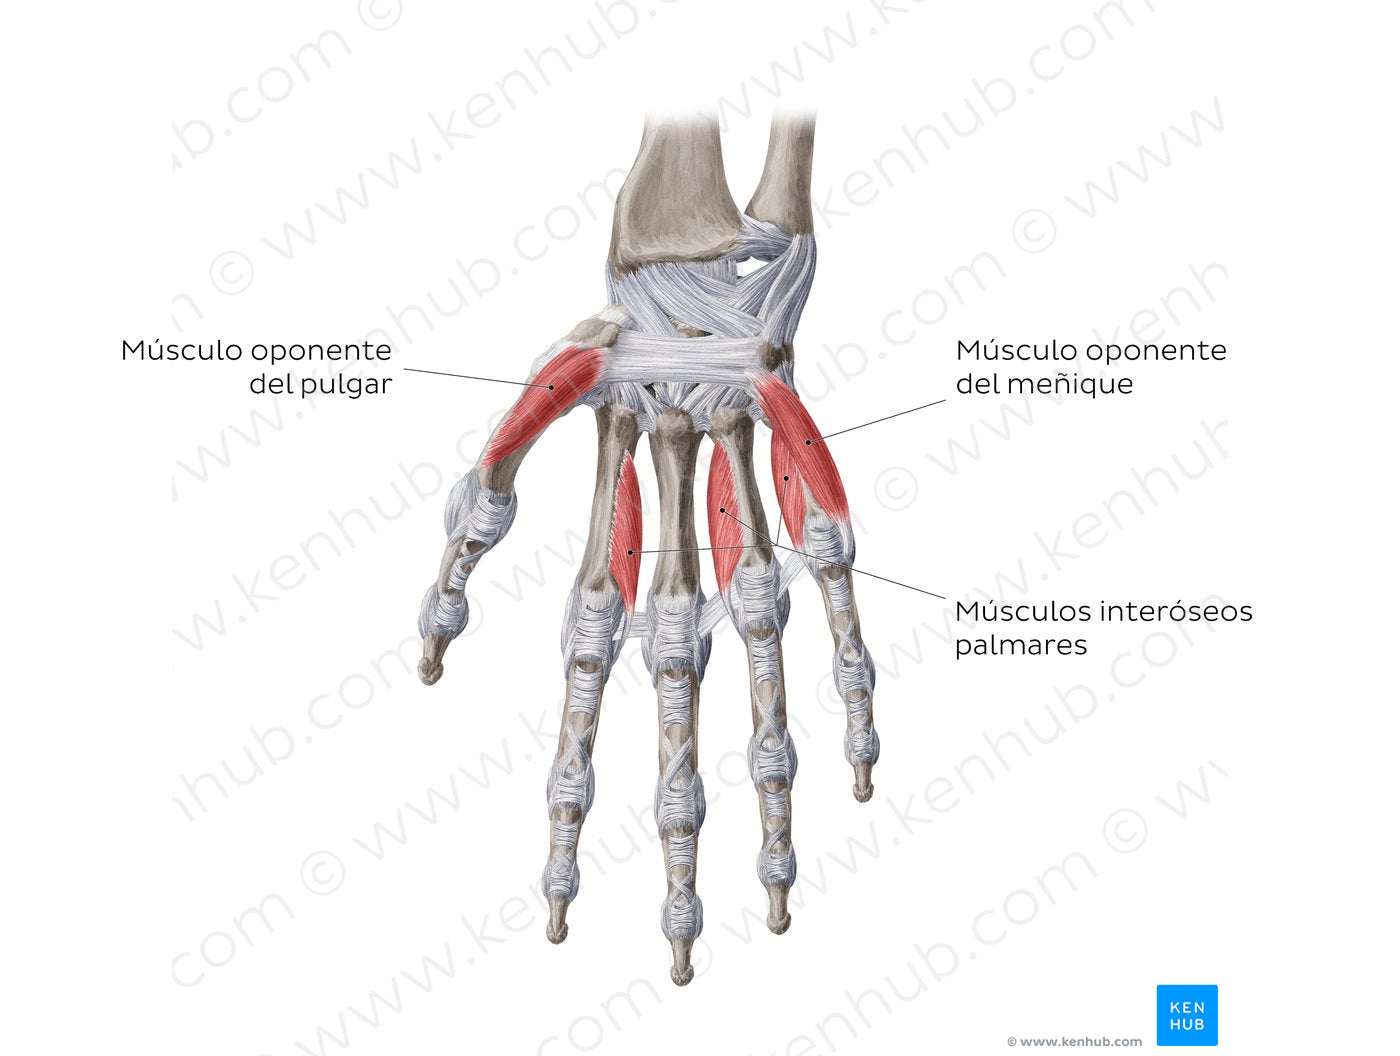 Muscles of the hand: deepest muscles (Spanish)